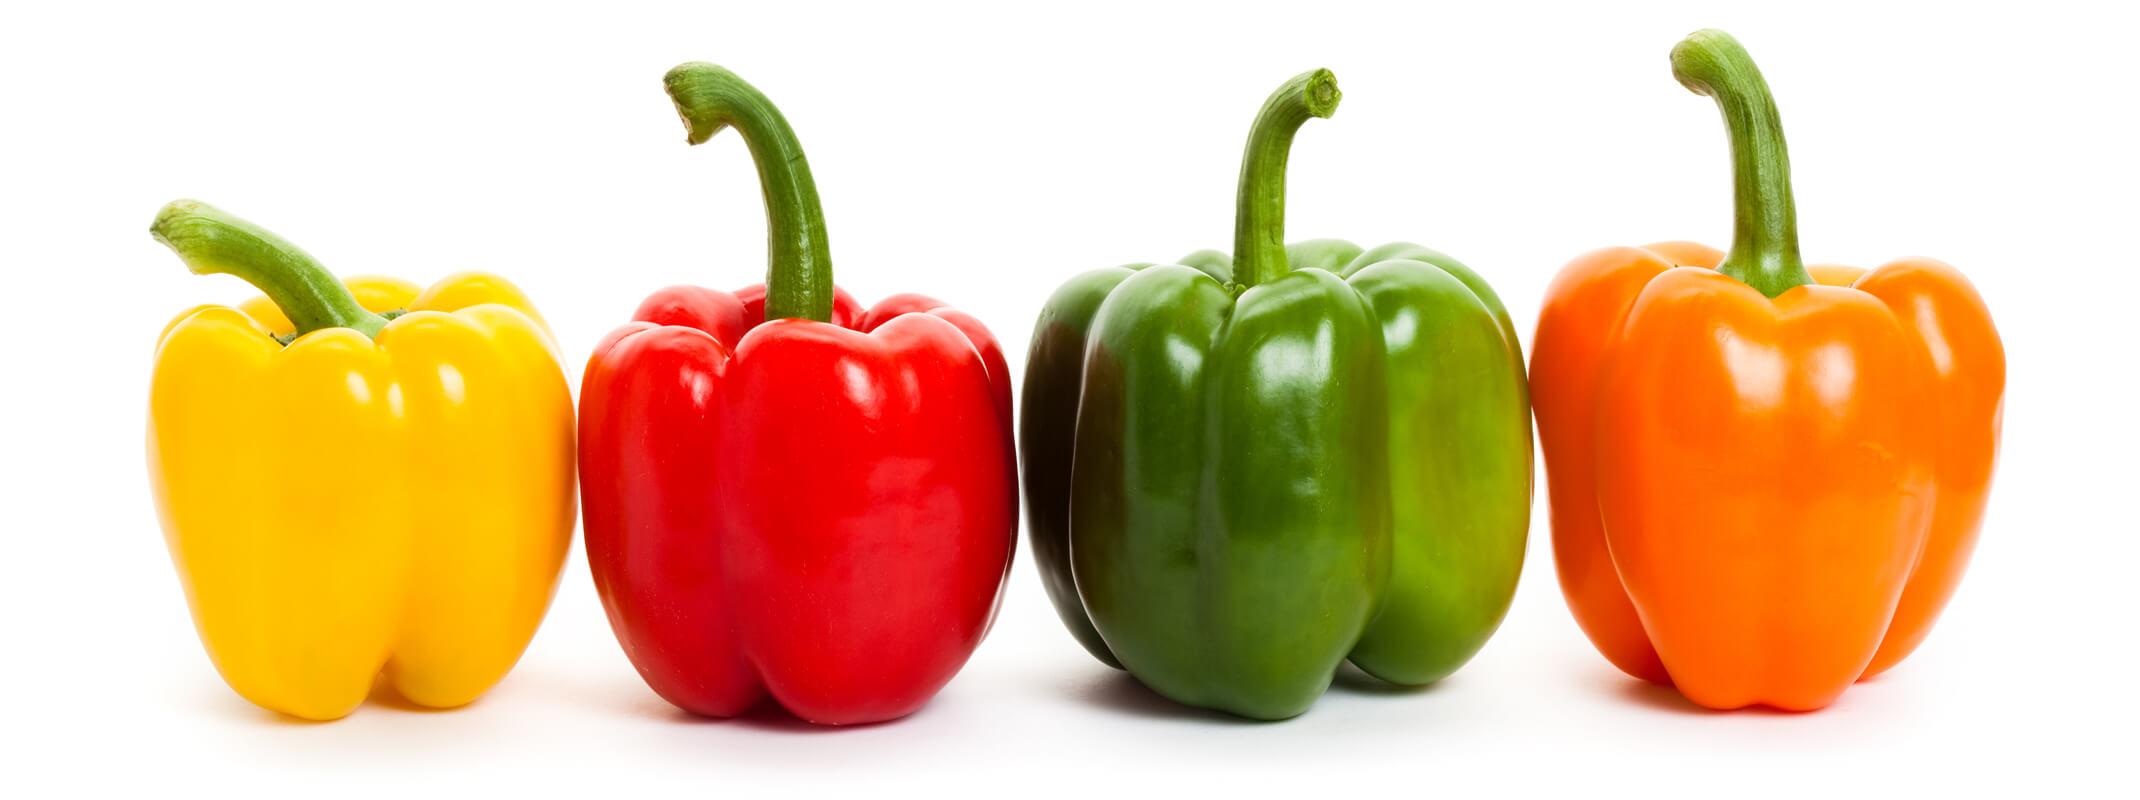 4 different colors of bell peppers, yellow, red, green and orange